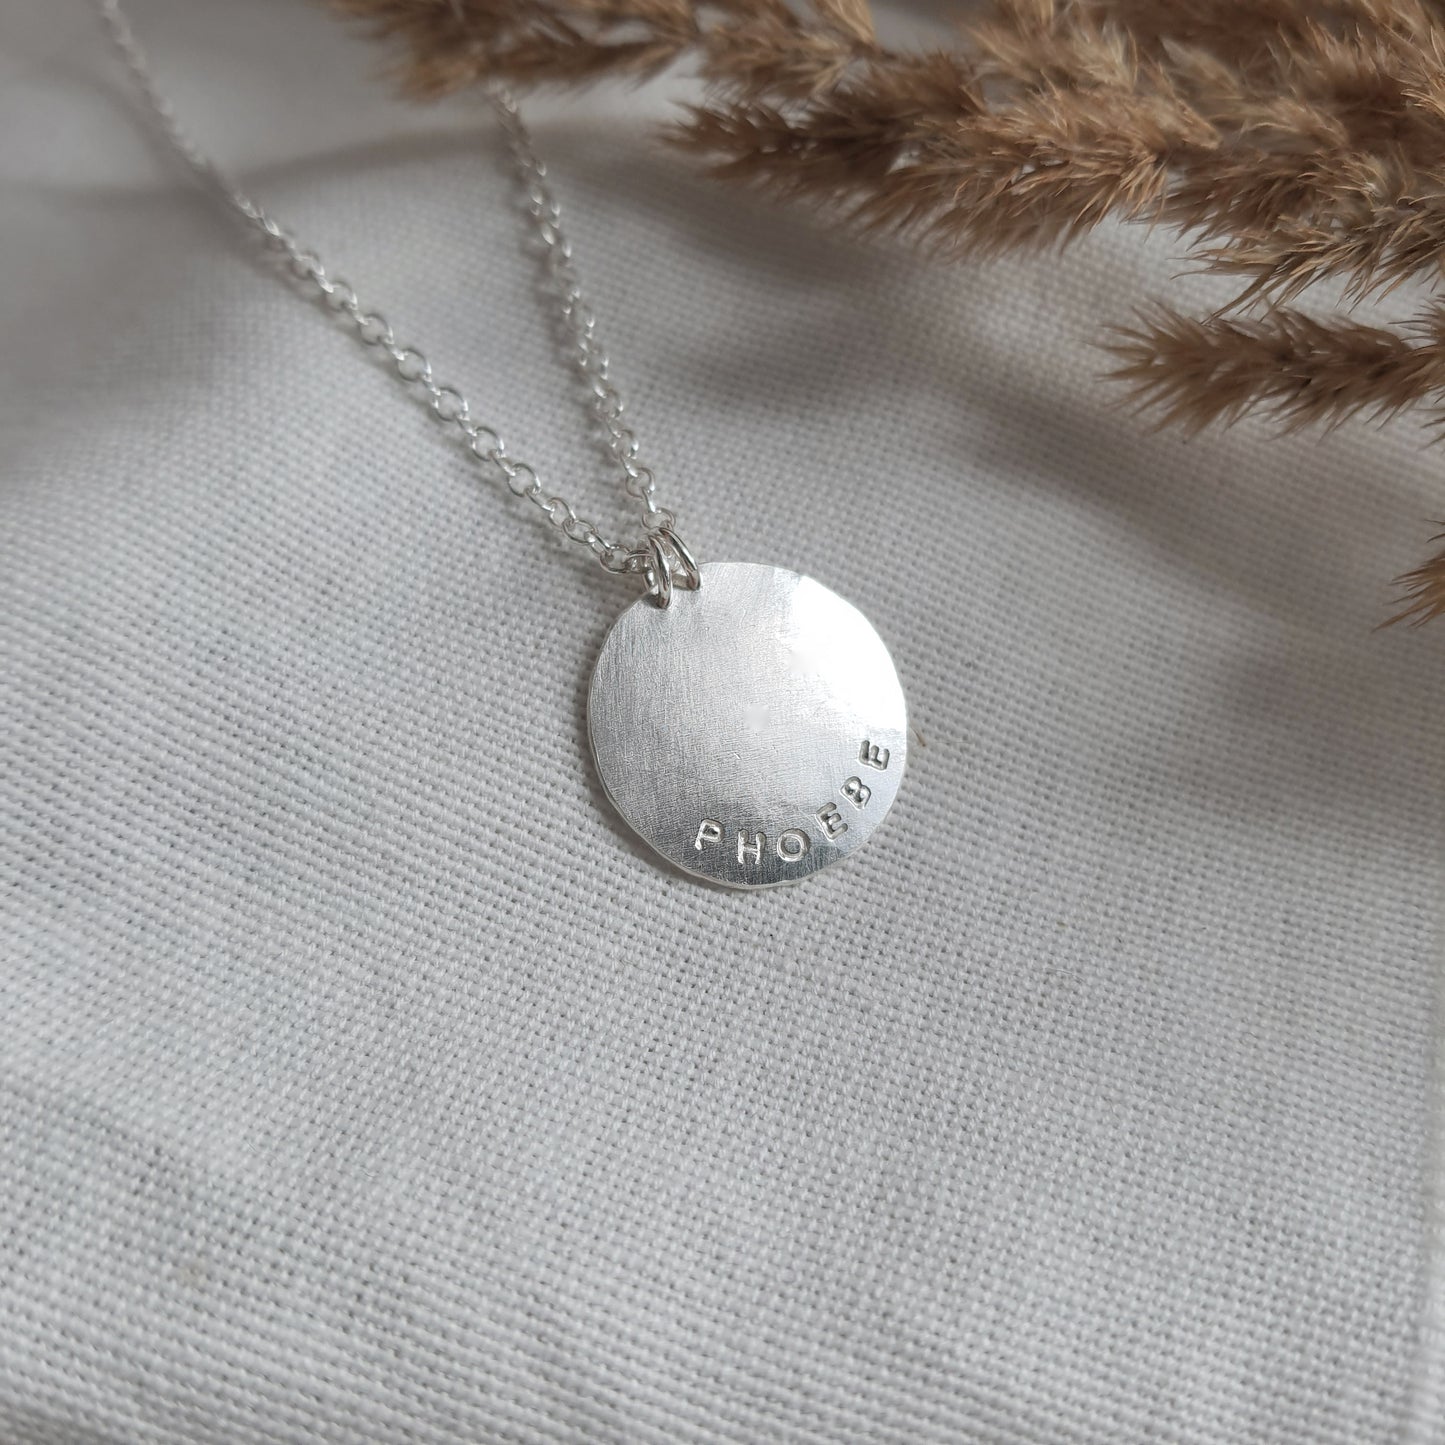 Personalised Silver Necklace - Large